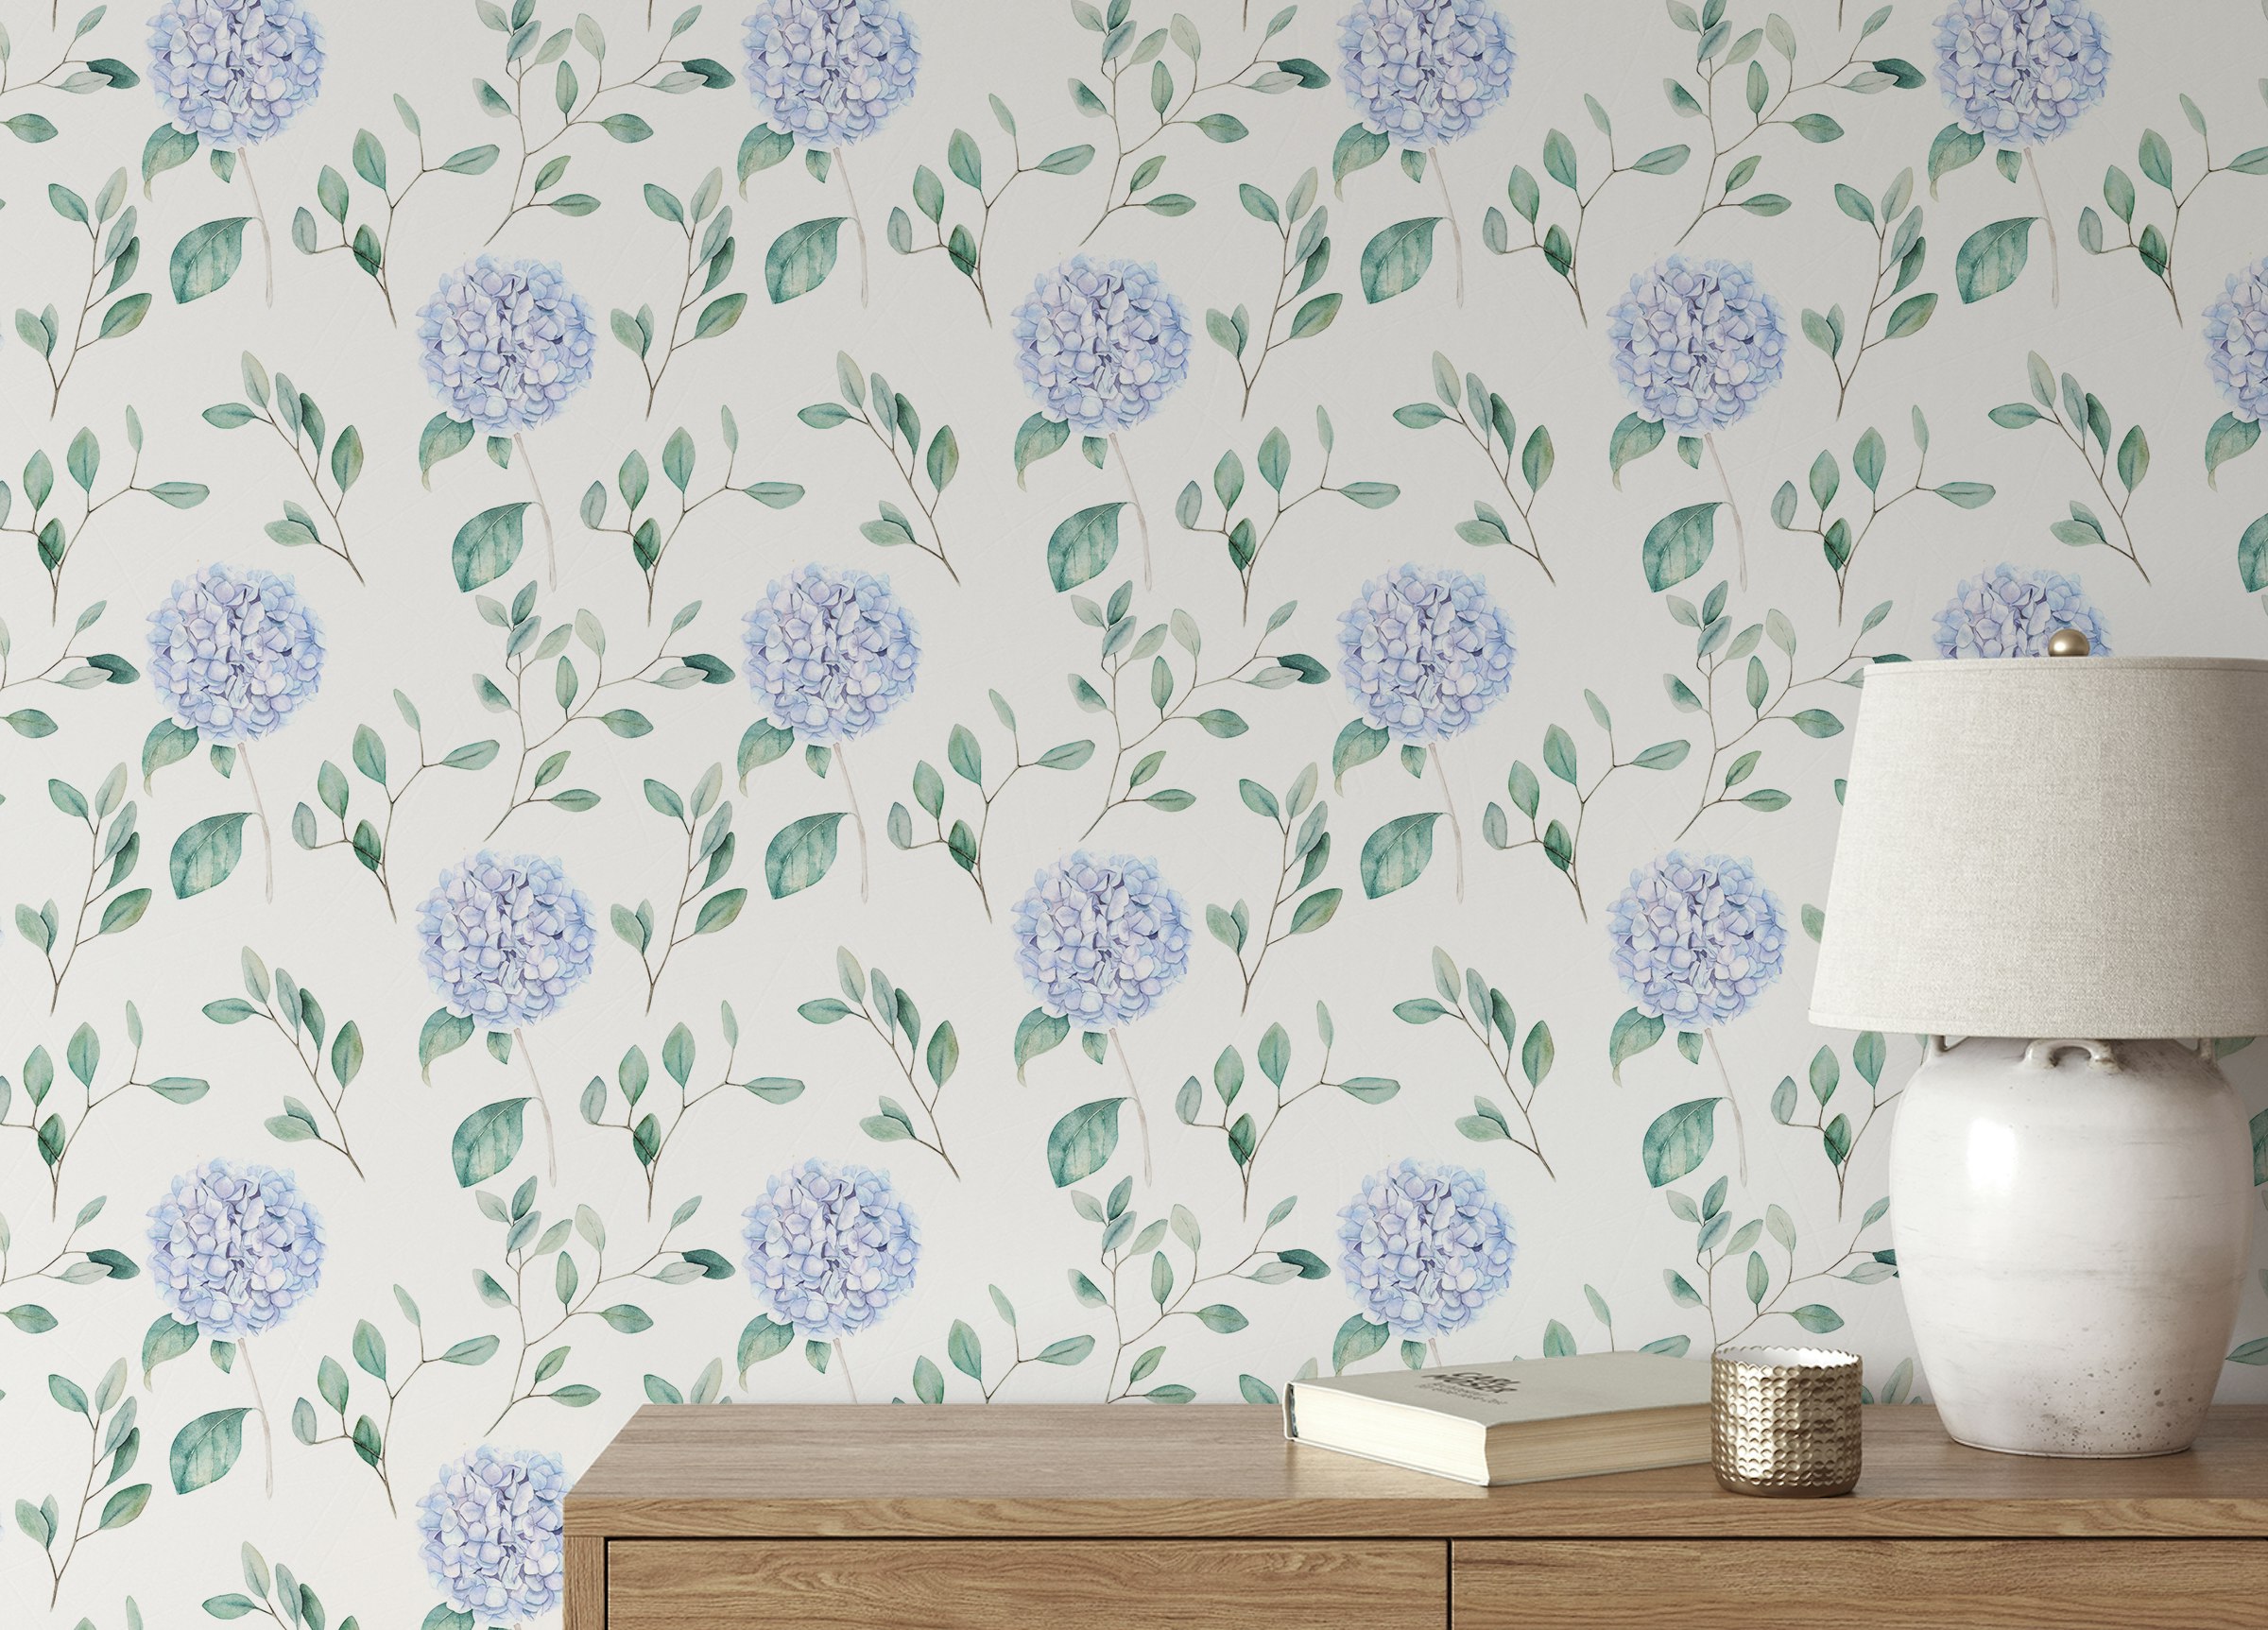 Peel and Stick Watercolor Hortensia Flowers and Branches Wallpaper